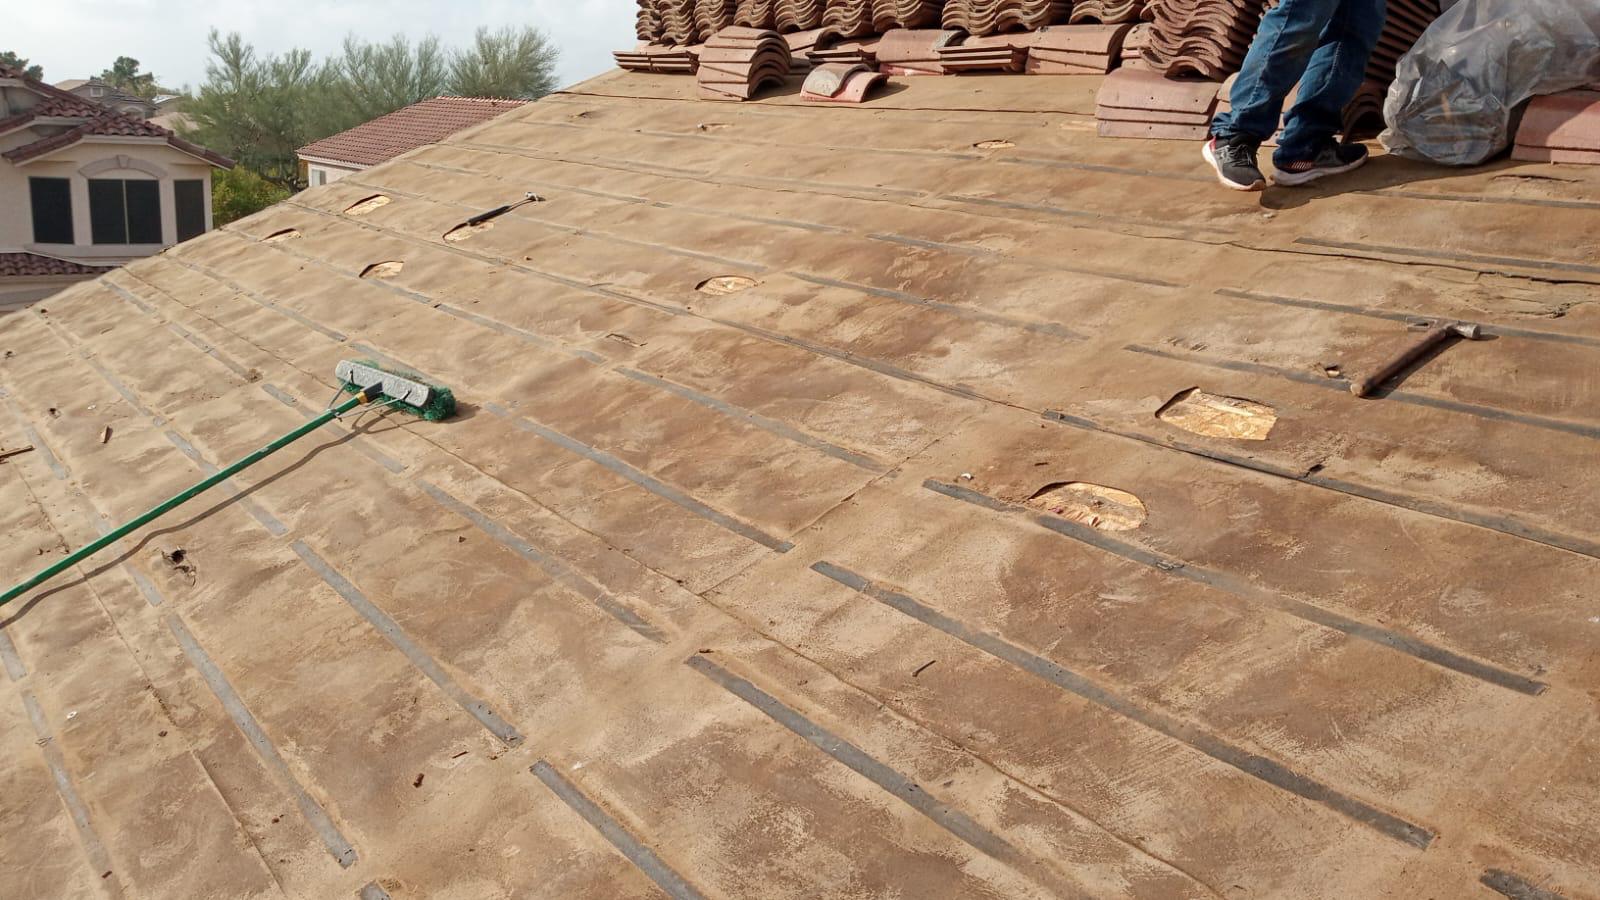 Precision underlayment by Behmer sets the stage for quality tile re-felting in Glendale